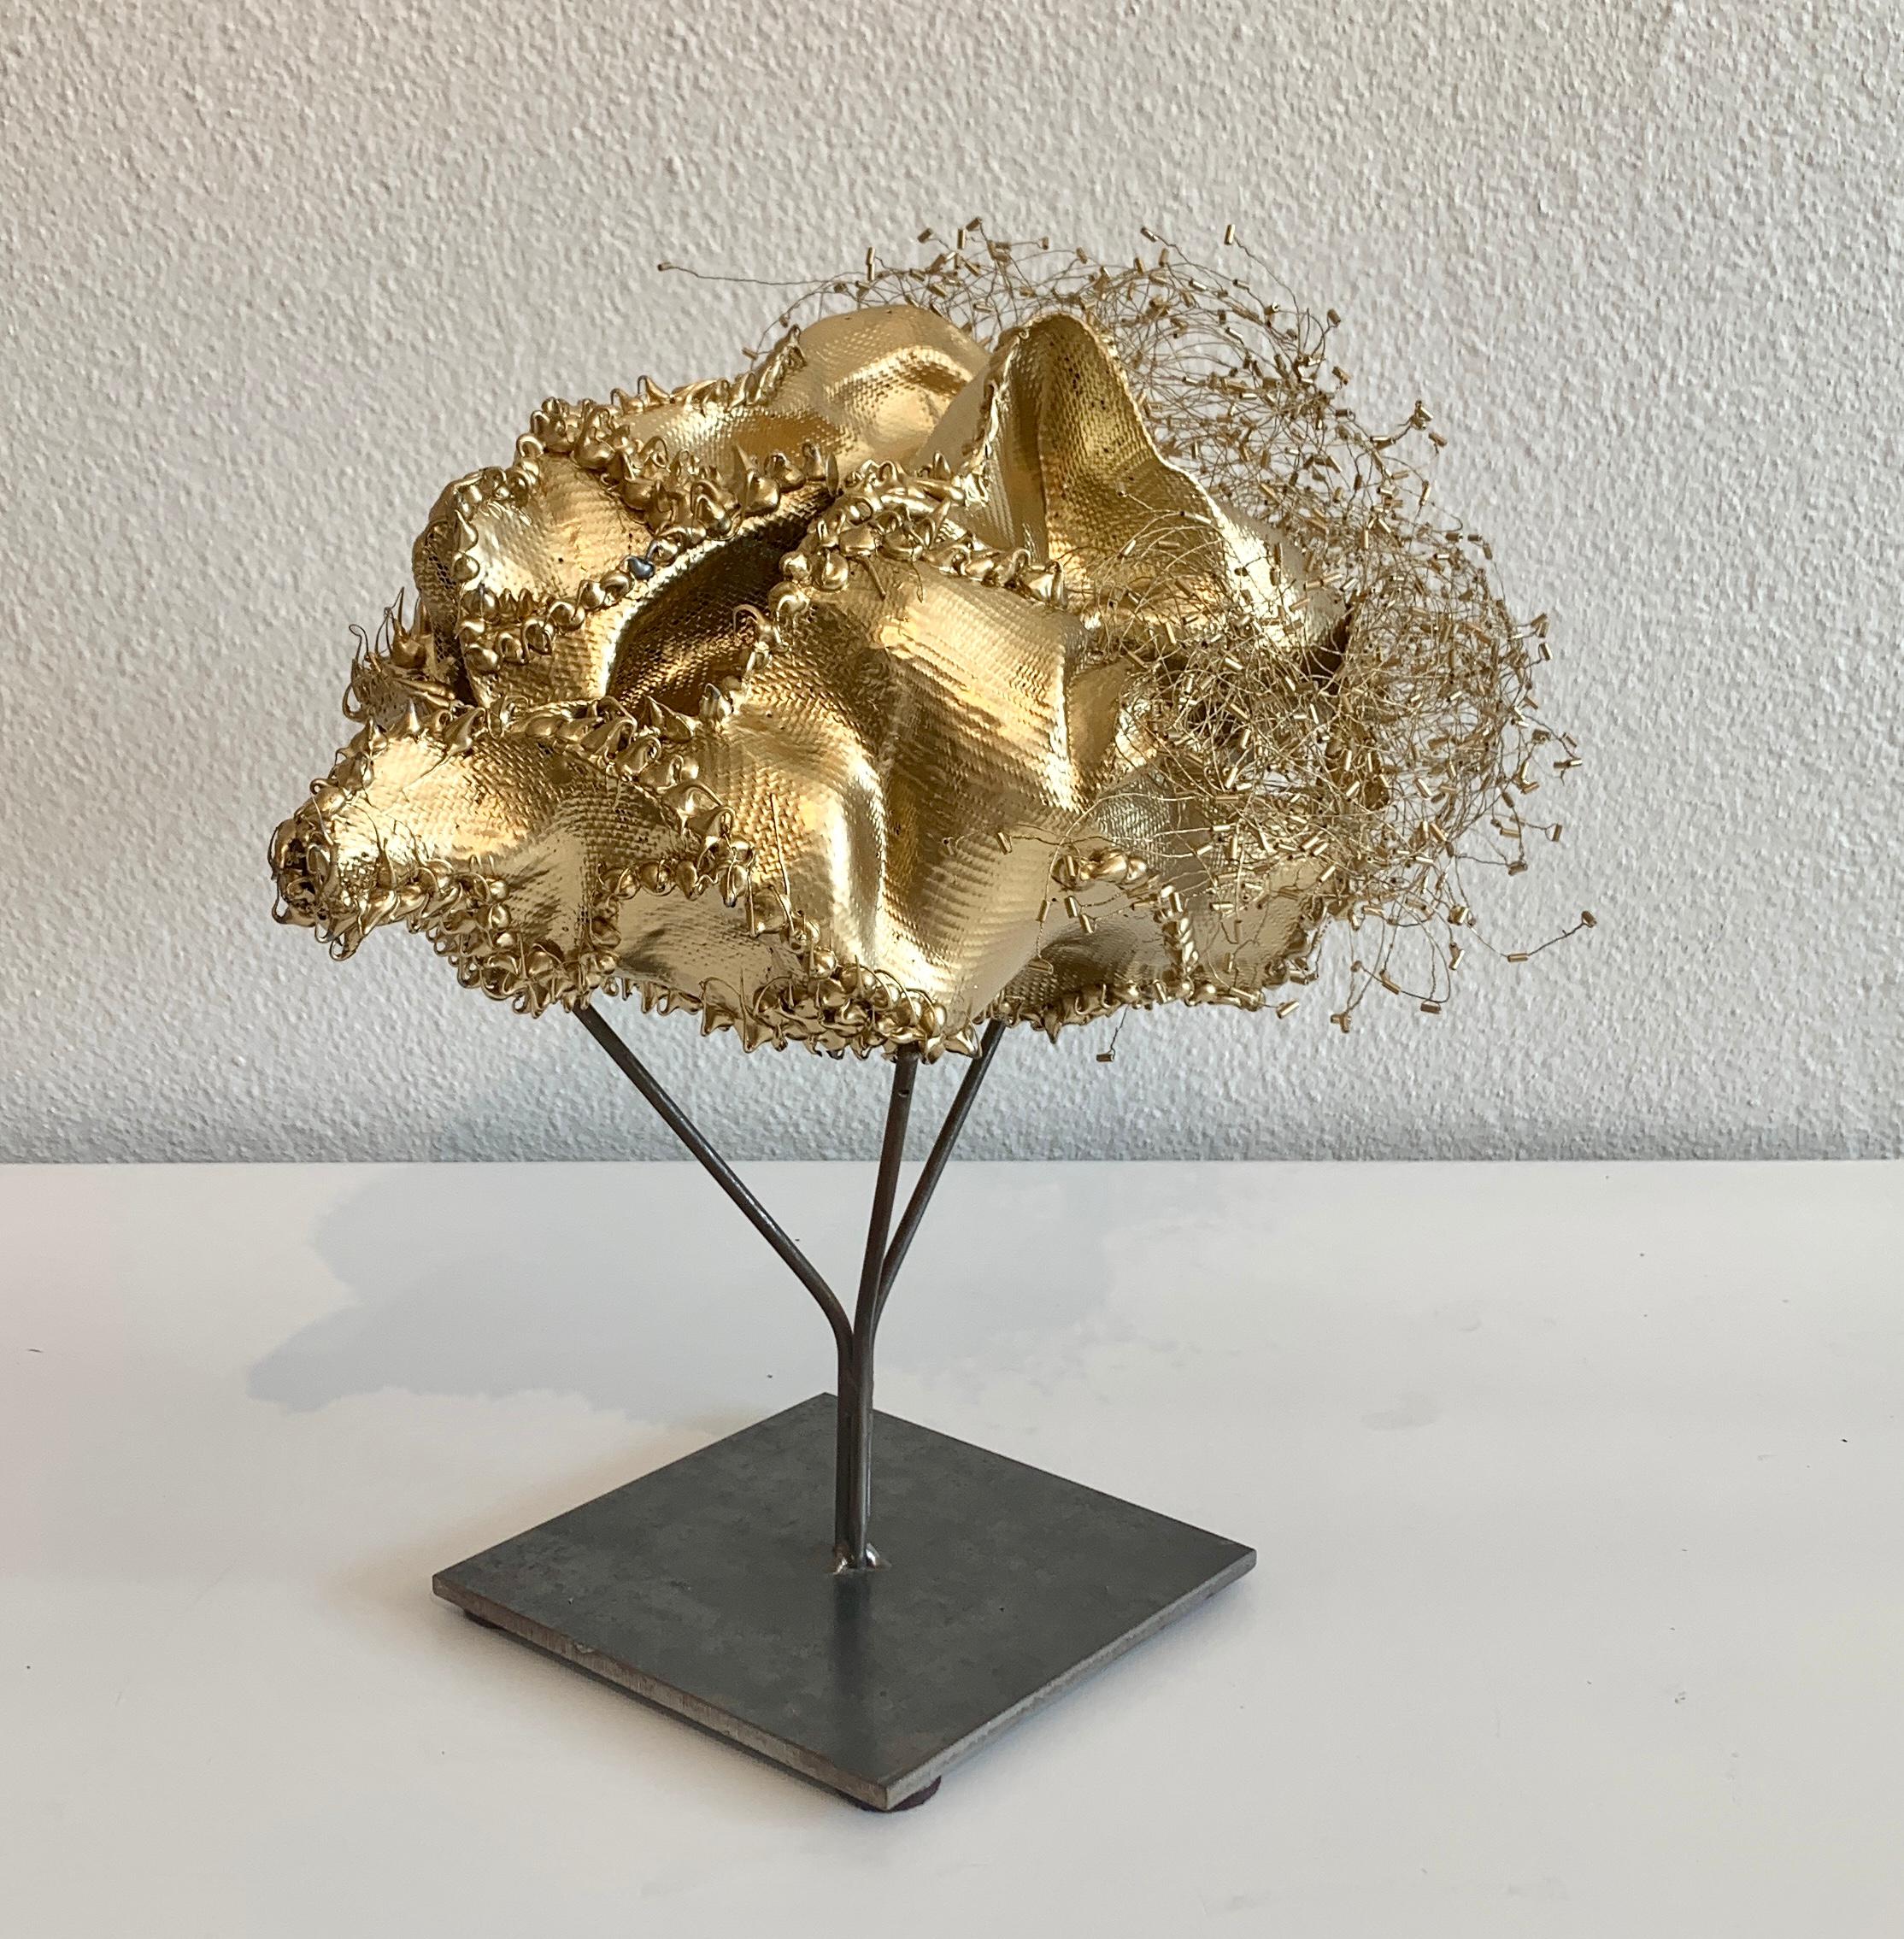 The Gathering Gilded, Atticus Adams Gold Metal Mesh Standing Sculpture For Sale 2